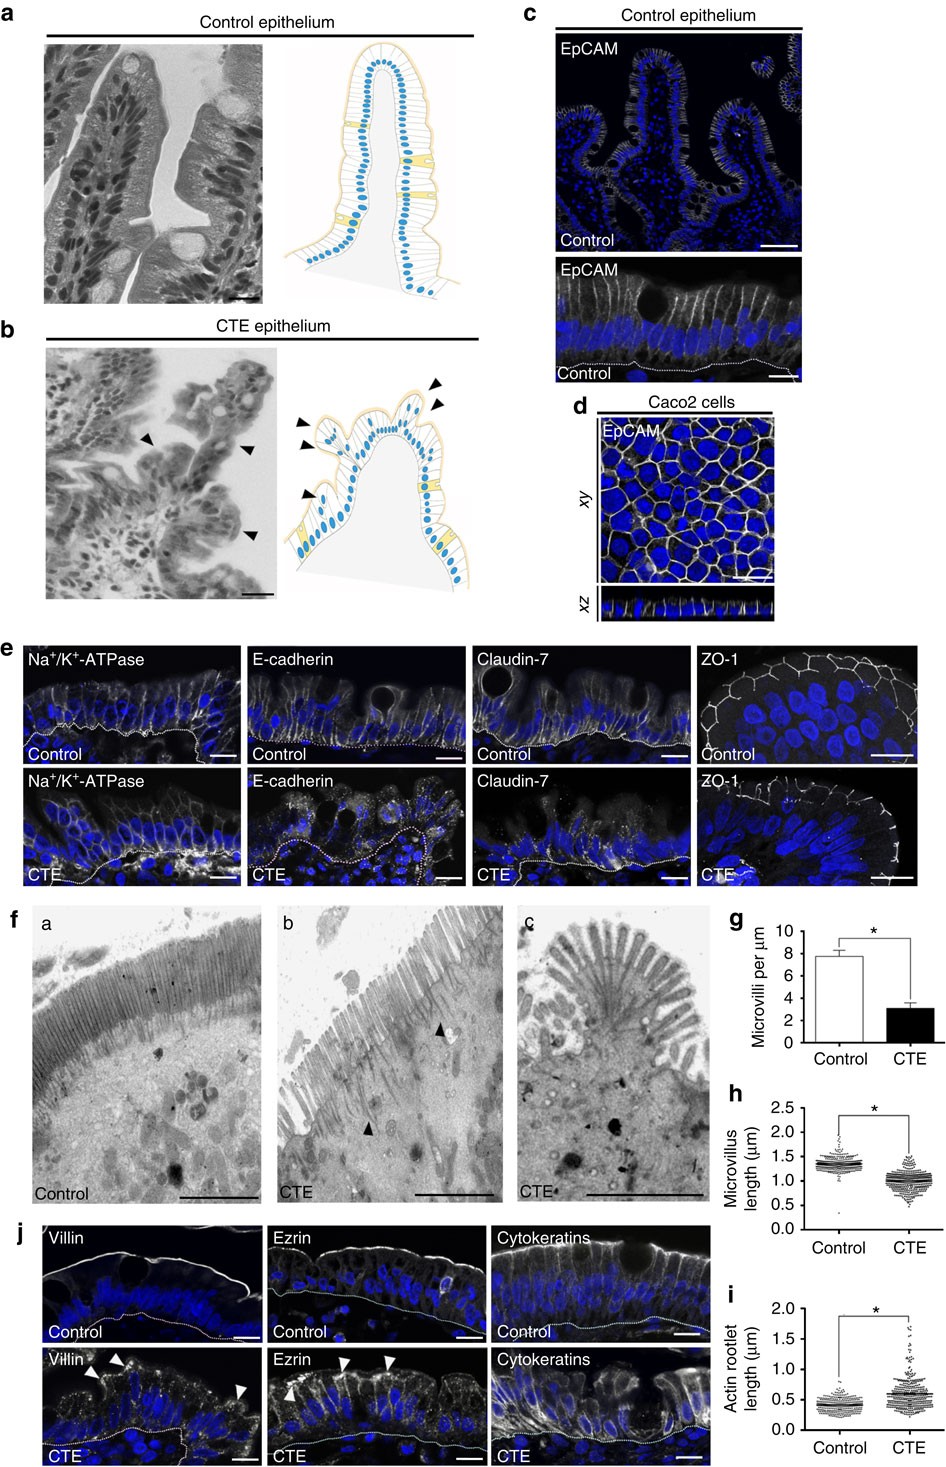 Contractile forces at tricellular contacts modulate epithelial organization  and monolayer integrity | Nature Communications